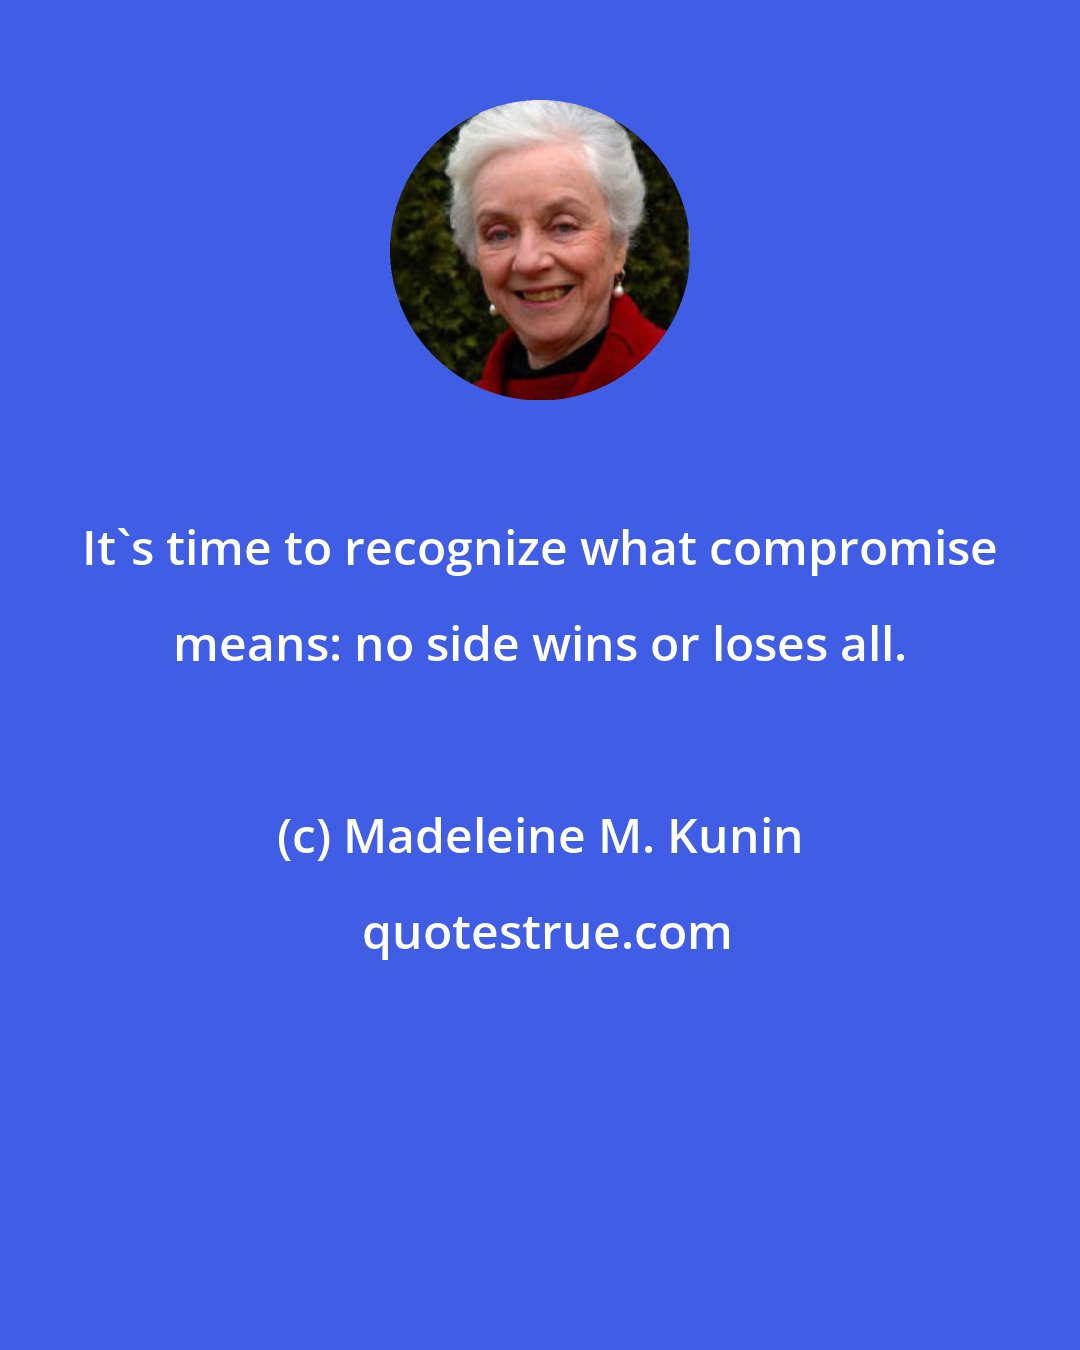 Madeleine M. Kunin: It's time to recognize what compromise means: no side wins or loses all.